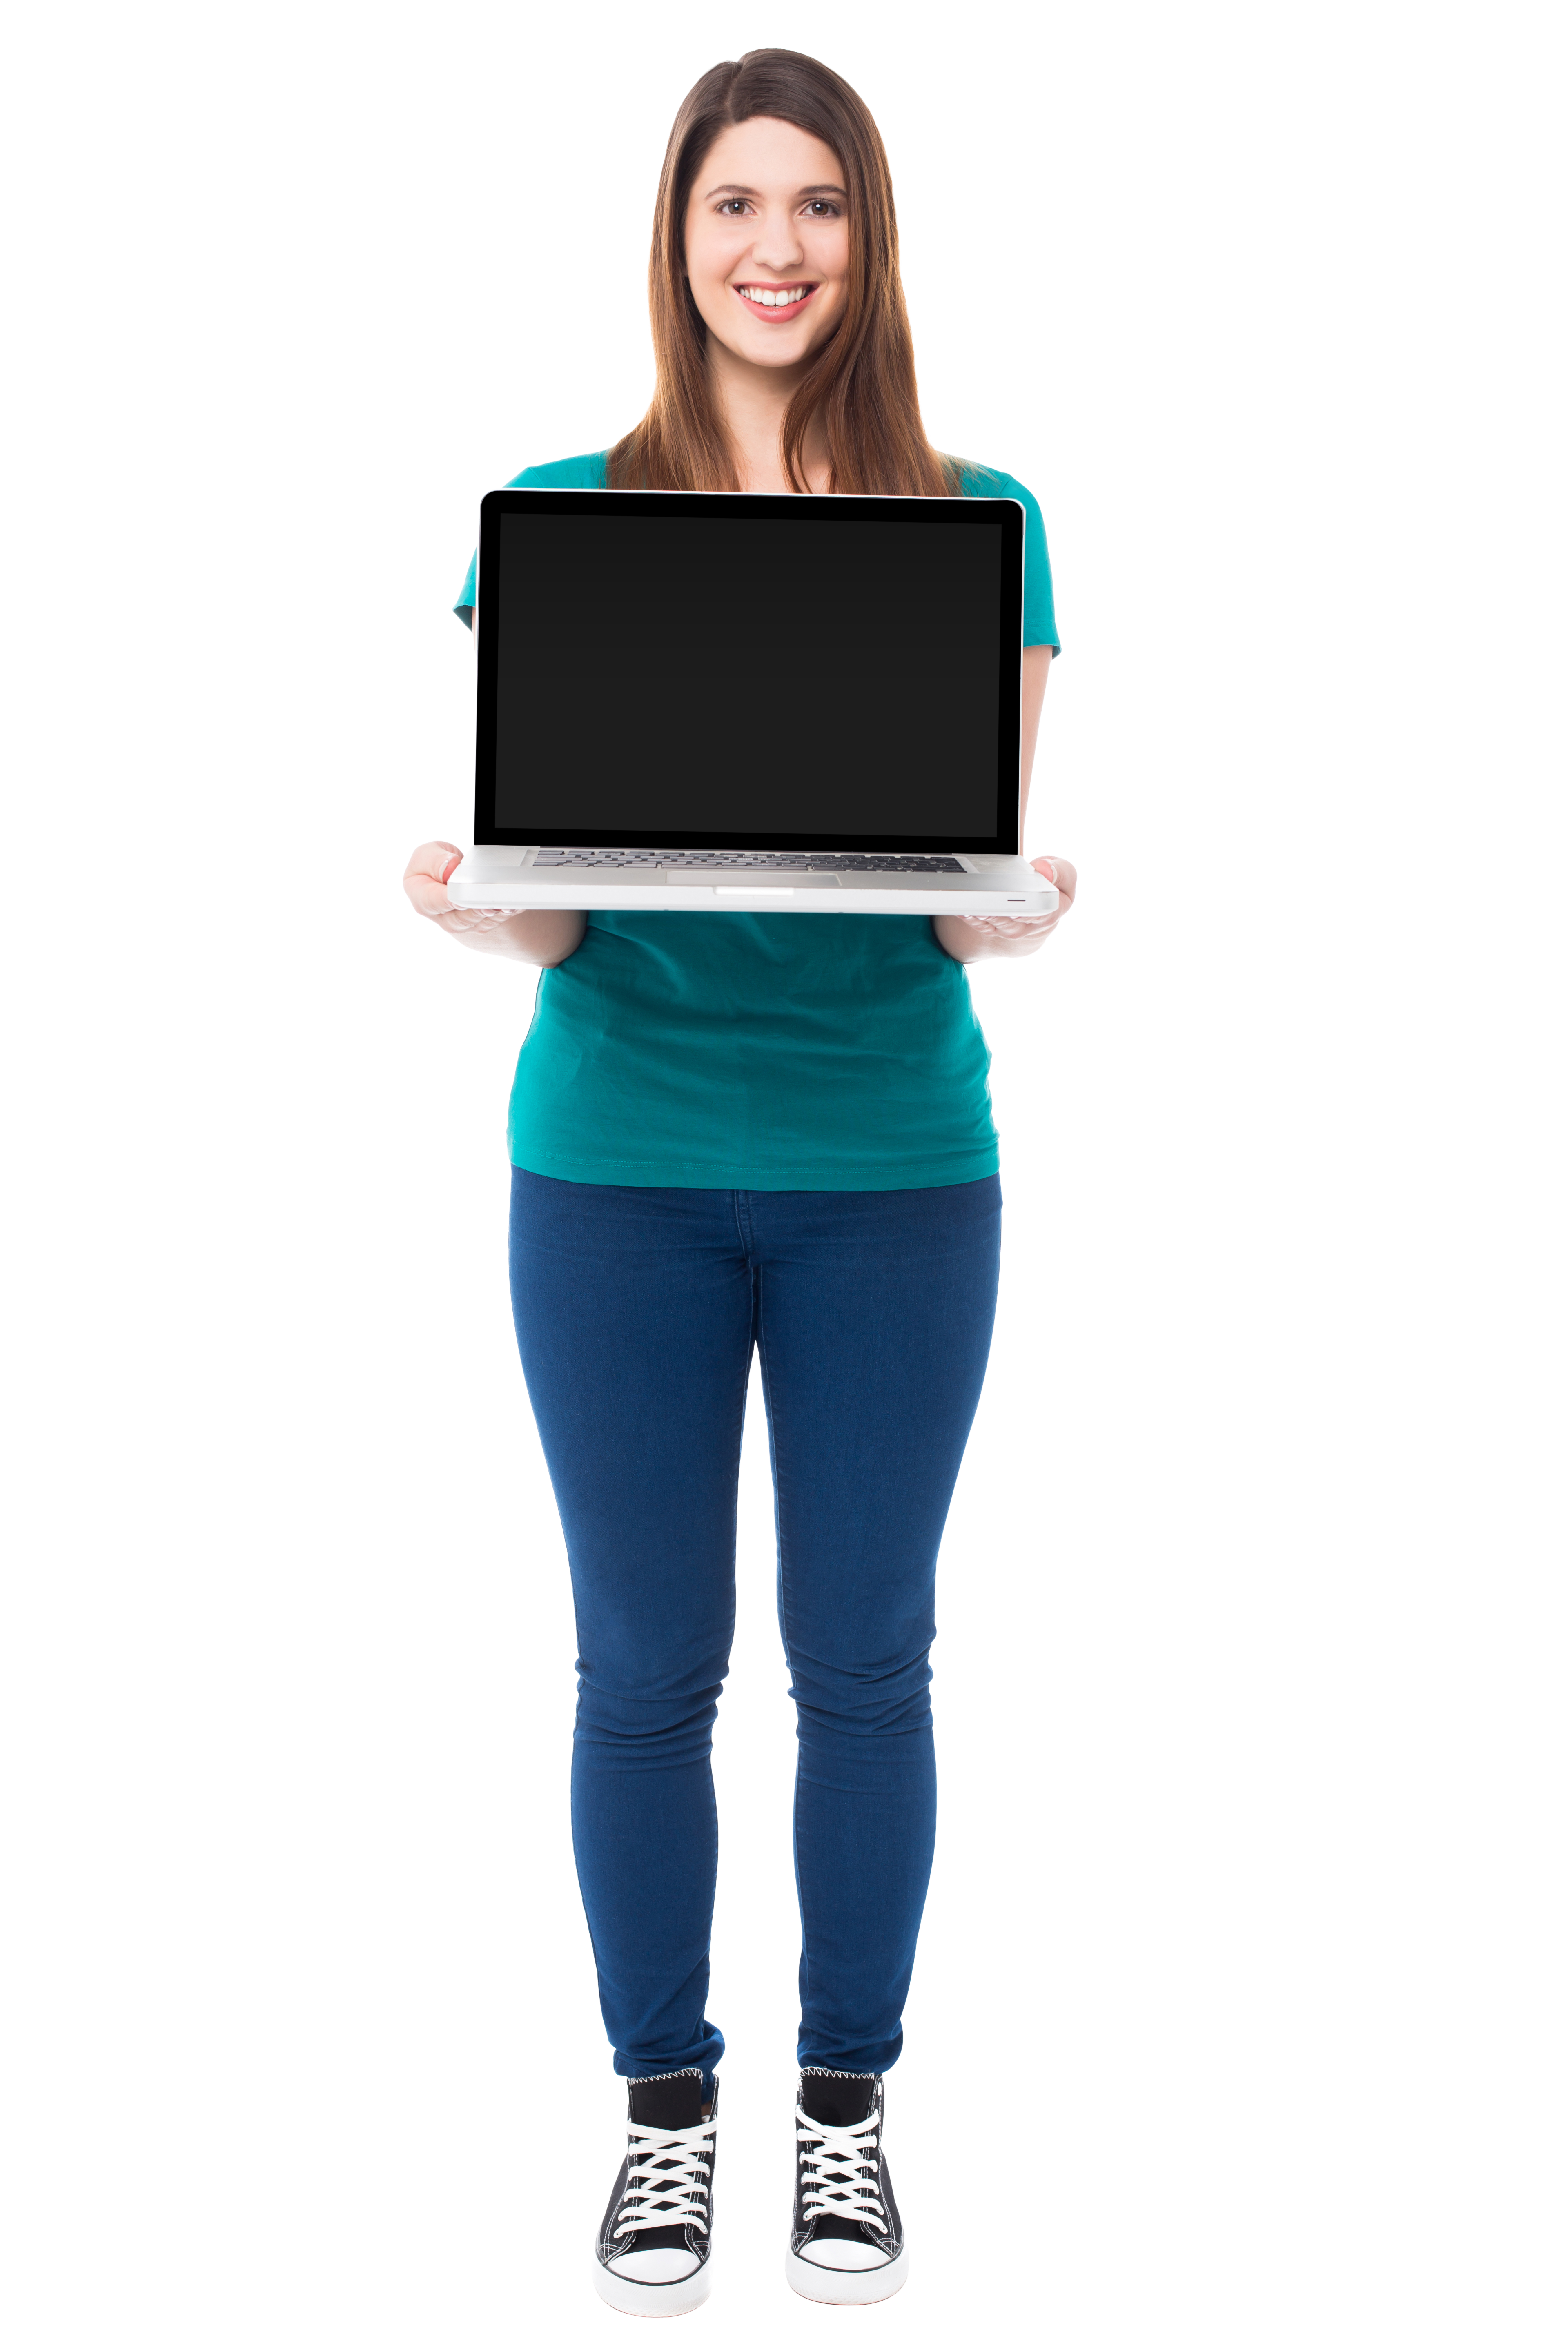 Girl With Laptop